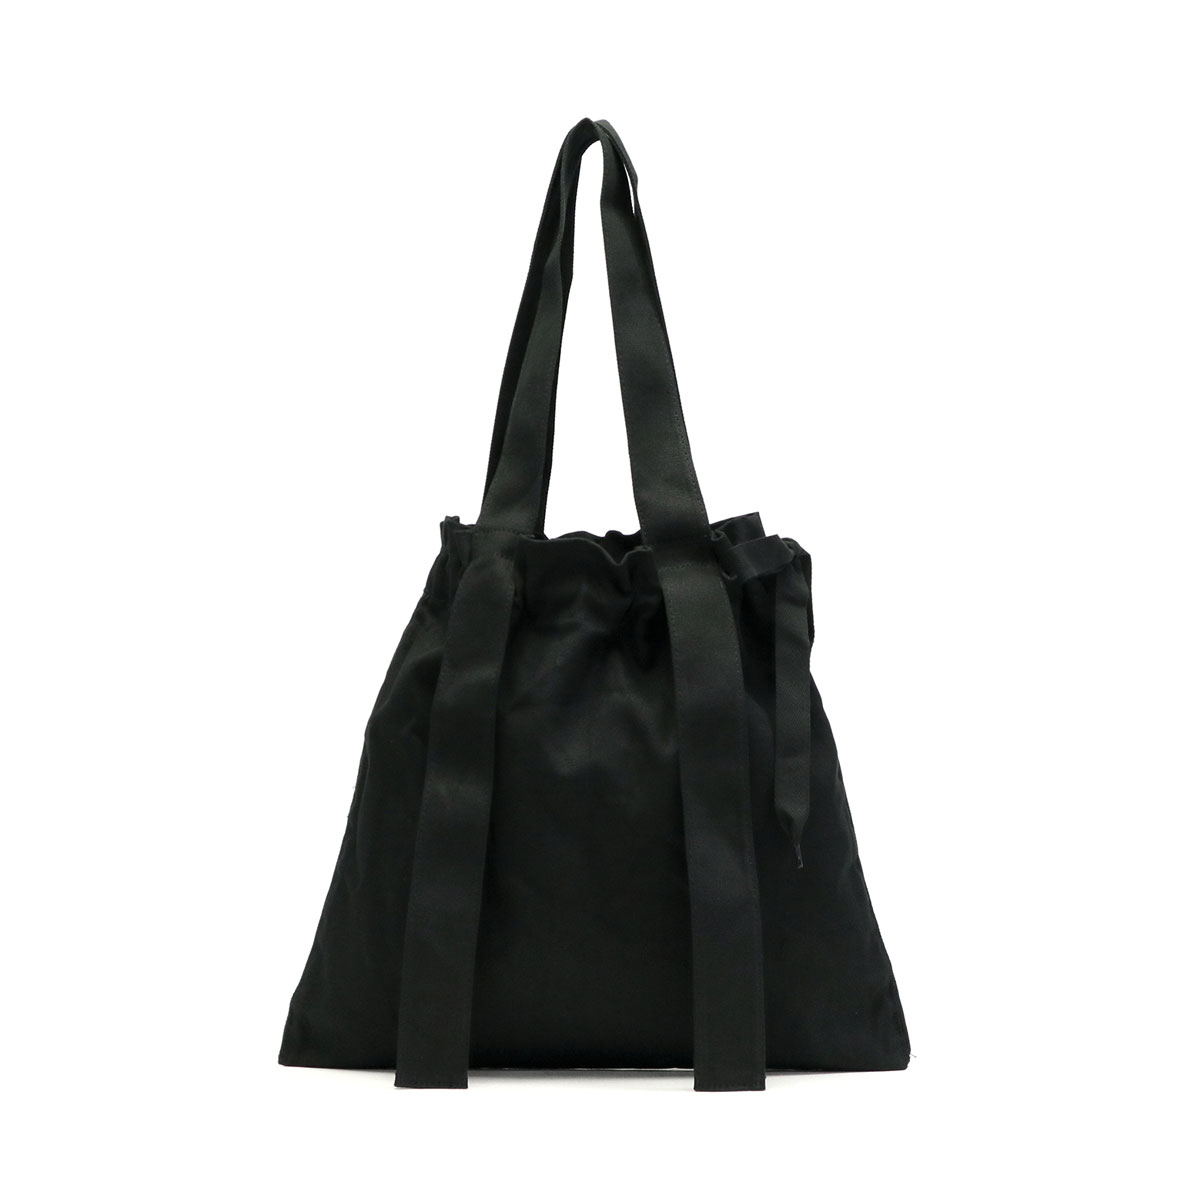 Repetto レペット Rondo tote bag with knots トートバッグ 51204-5-50333